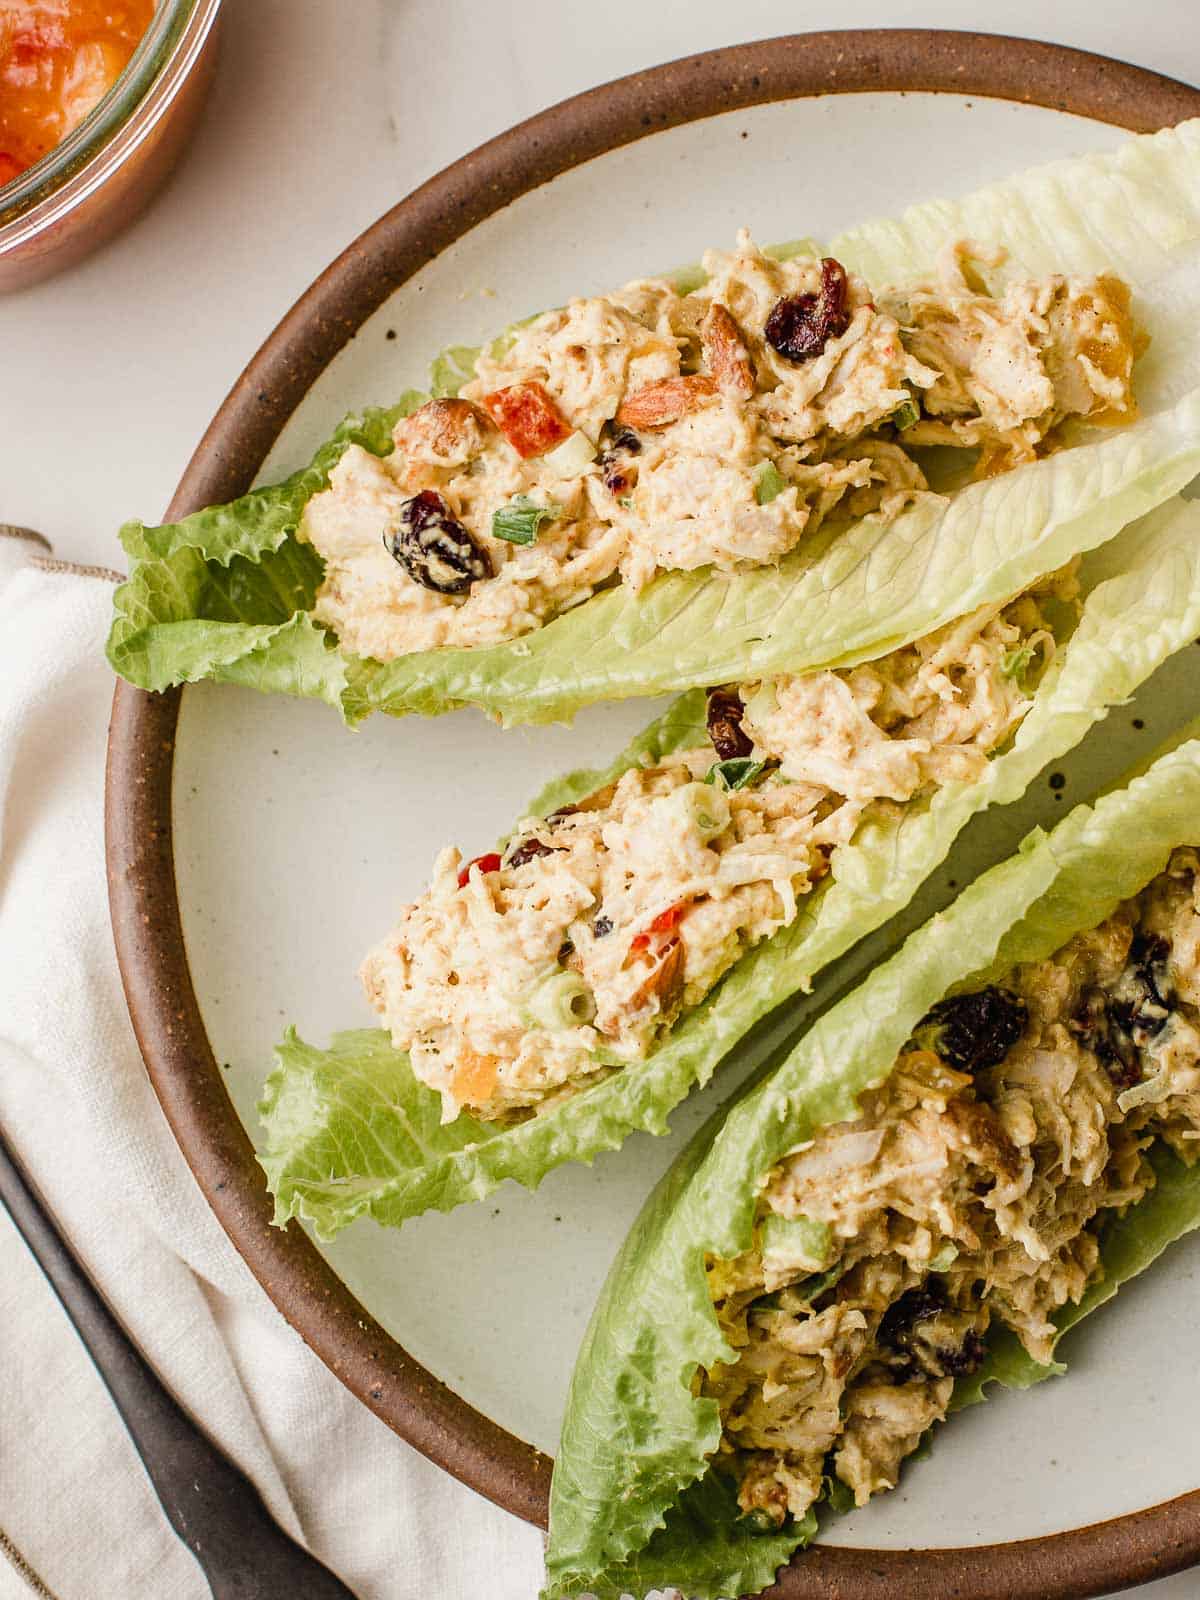 Curried chicken salad with mango chutney in lettuce wraps.